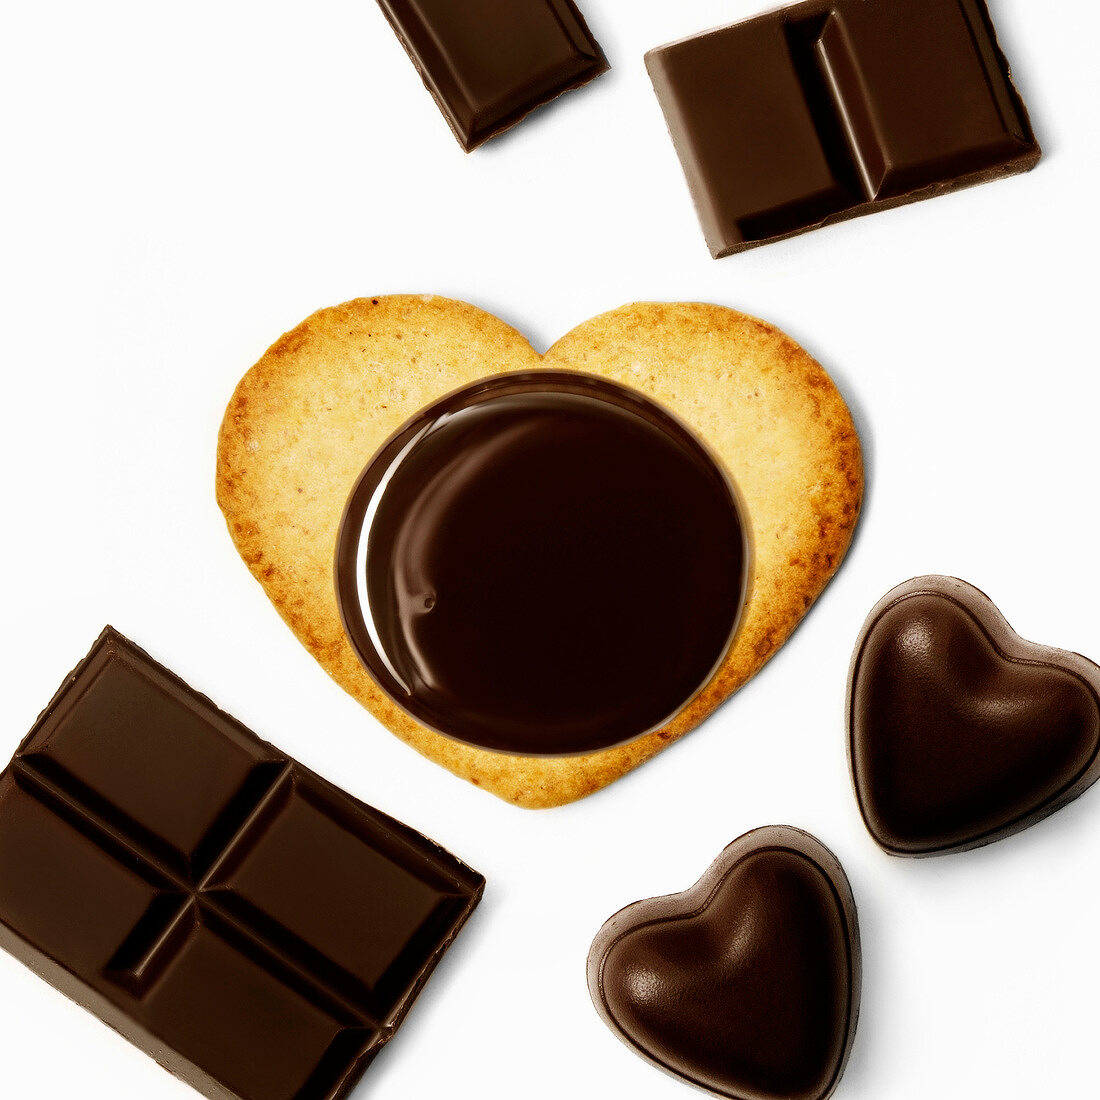 Heart-shaped biscuit with dark chocolate